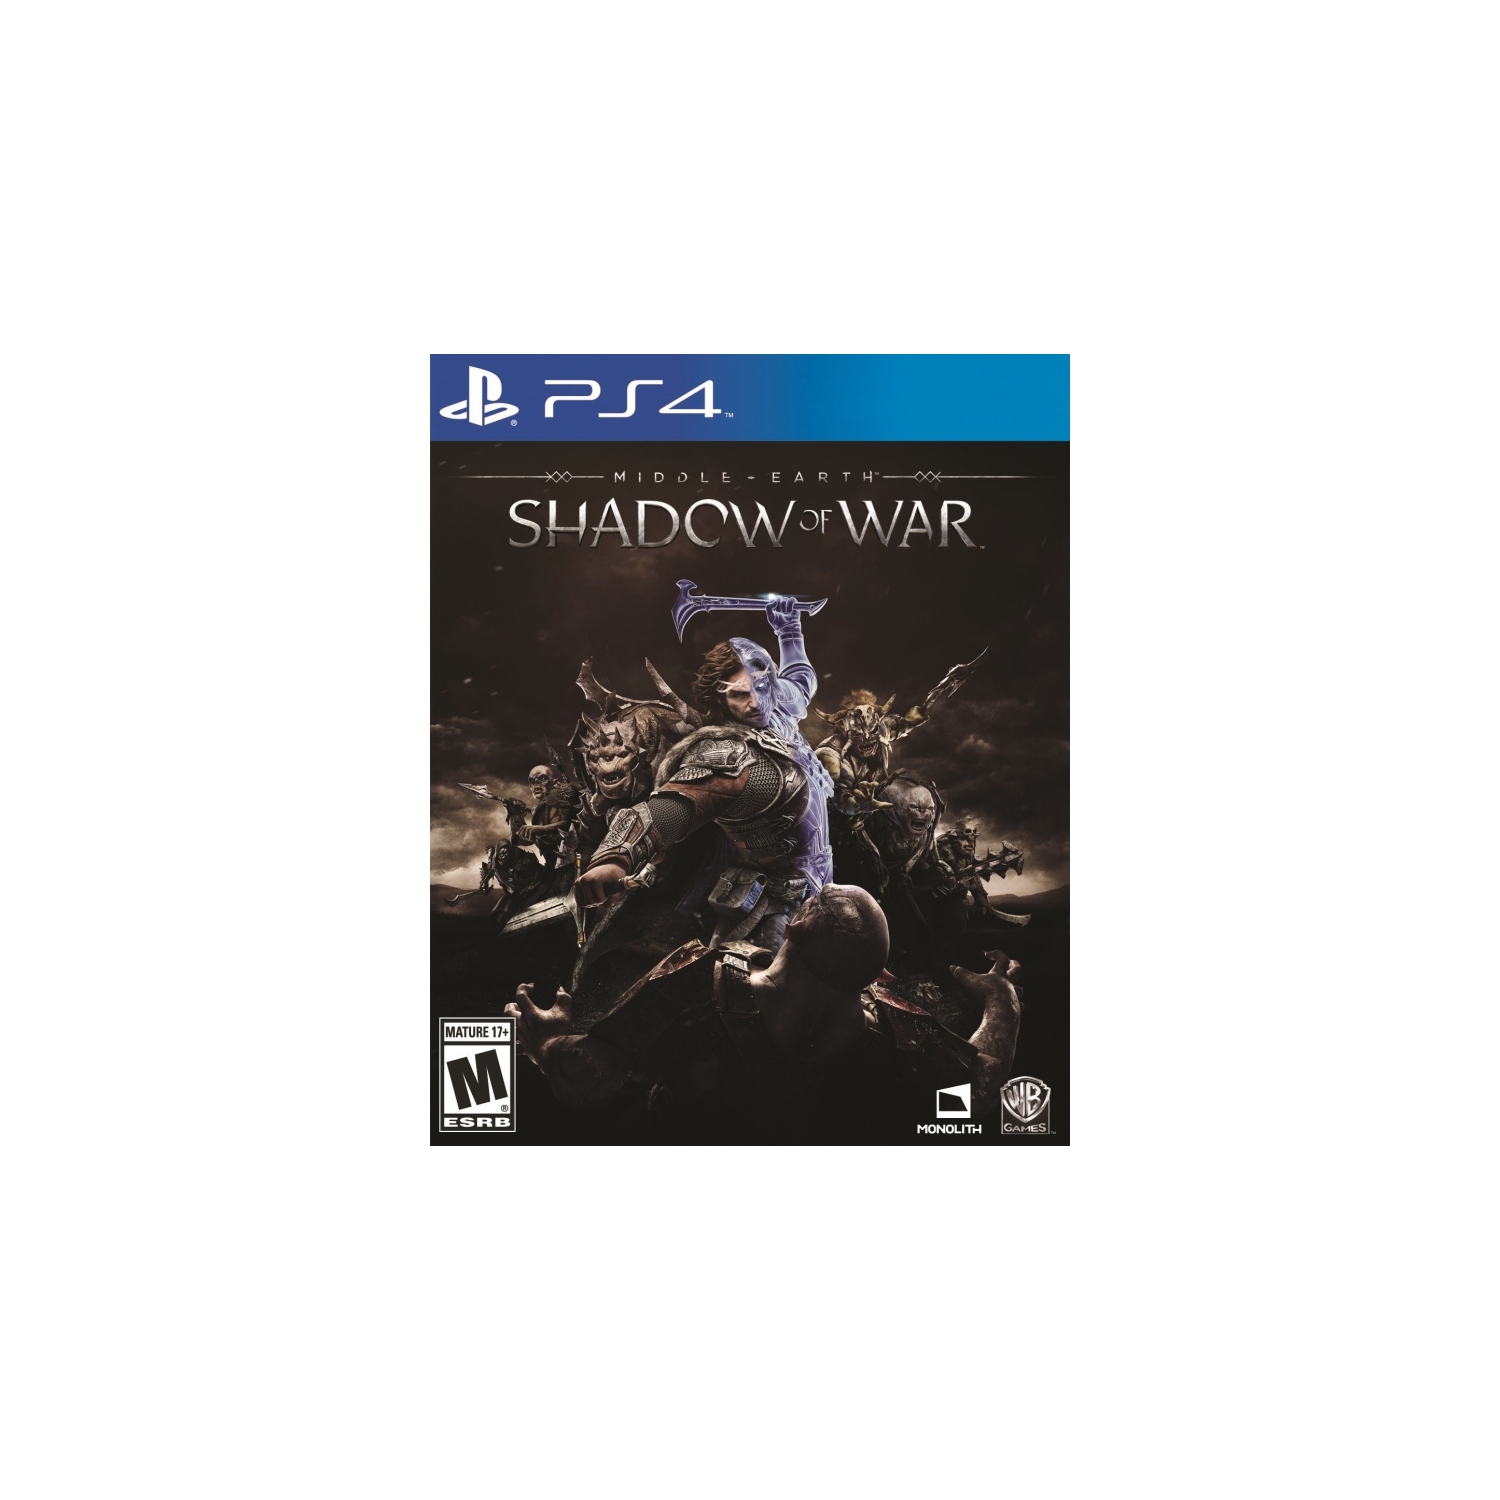 MIDDLE EARTH SHADOW OF WAR [M]